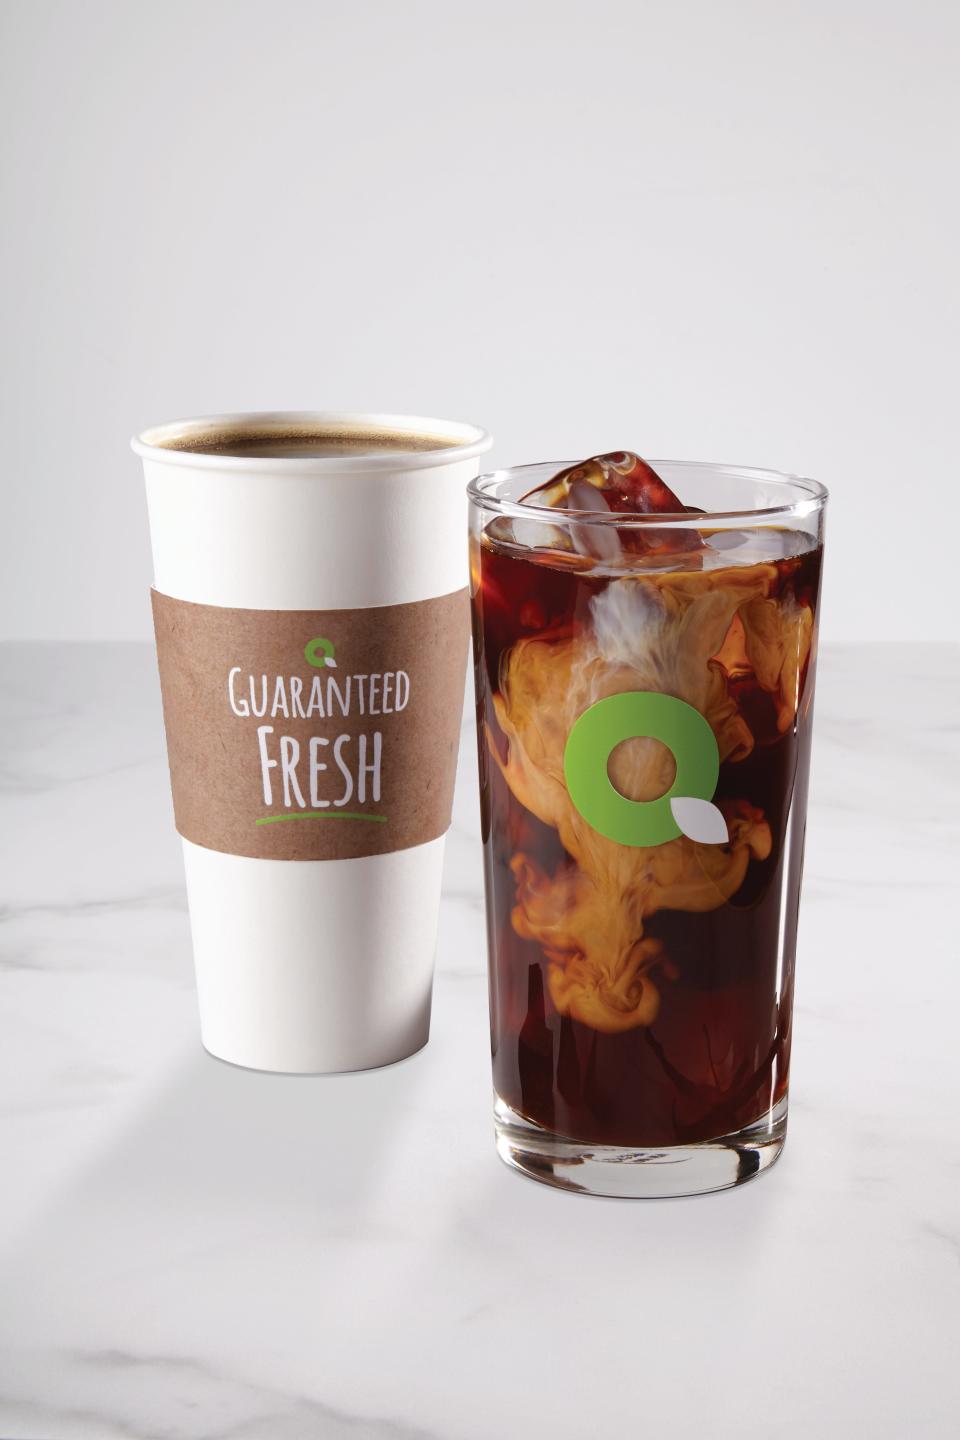 On National Coffee Day QuickChek is giving its rewards members a free any size, self-serve coffee – hot or iced – with any purchase.